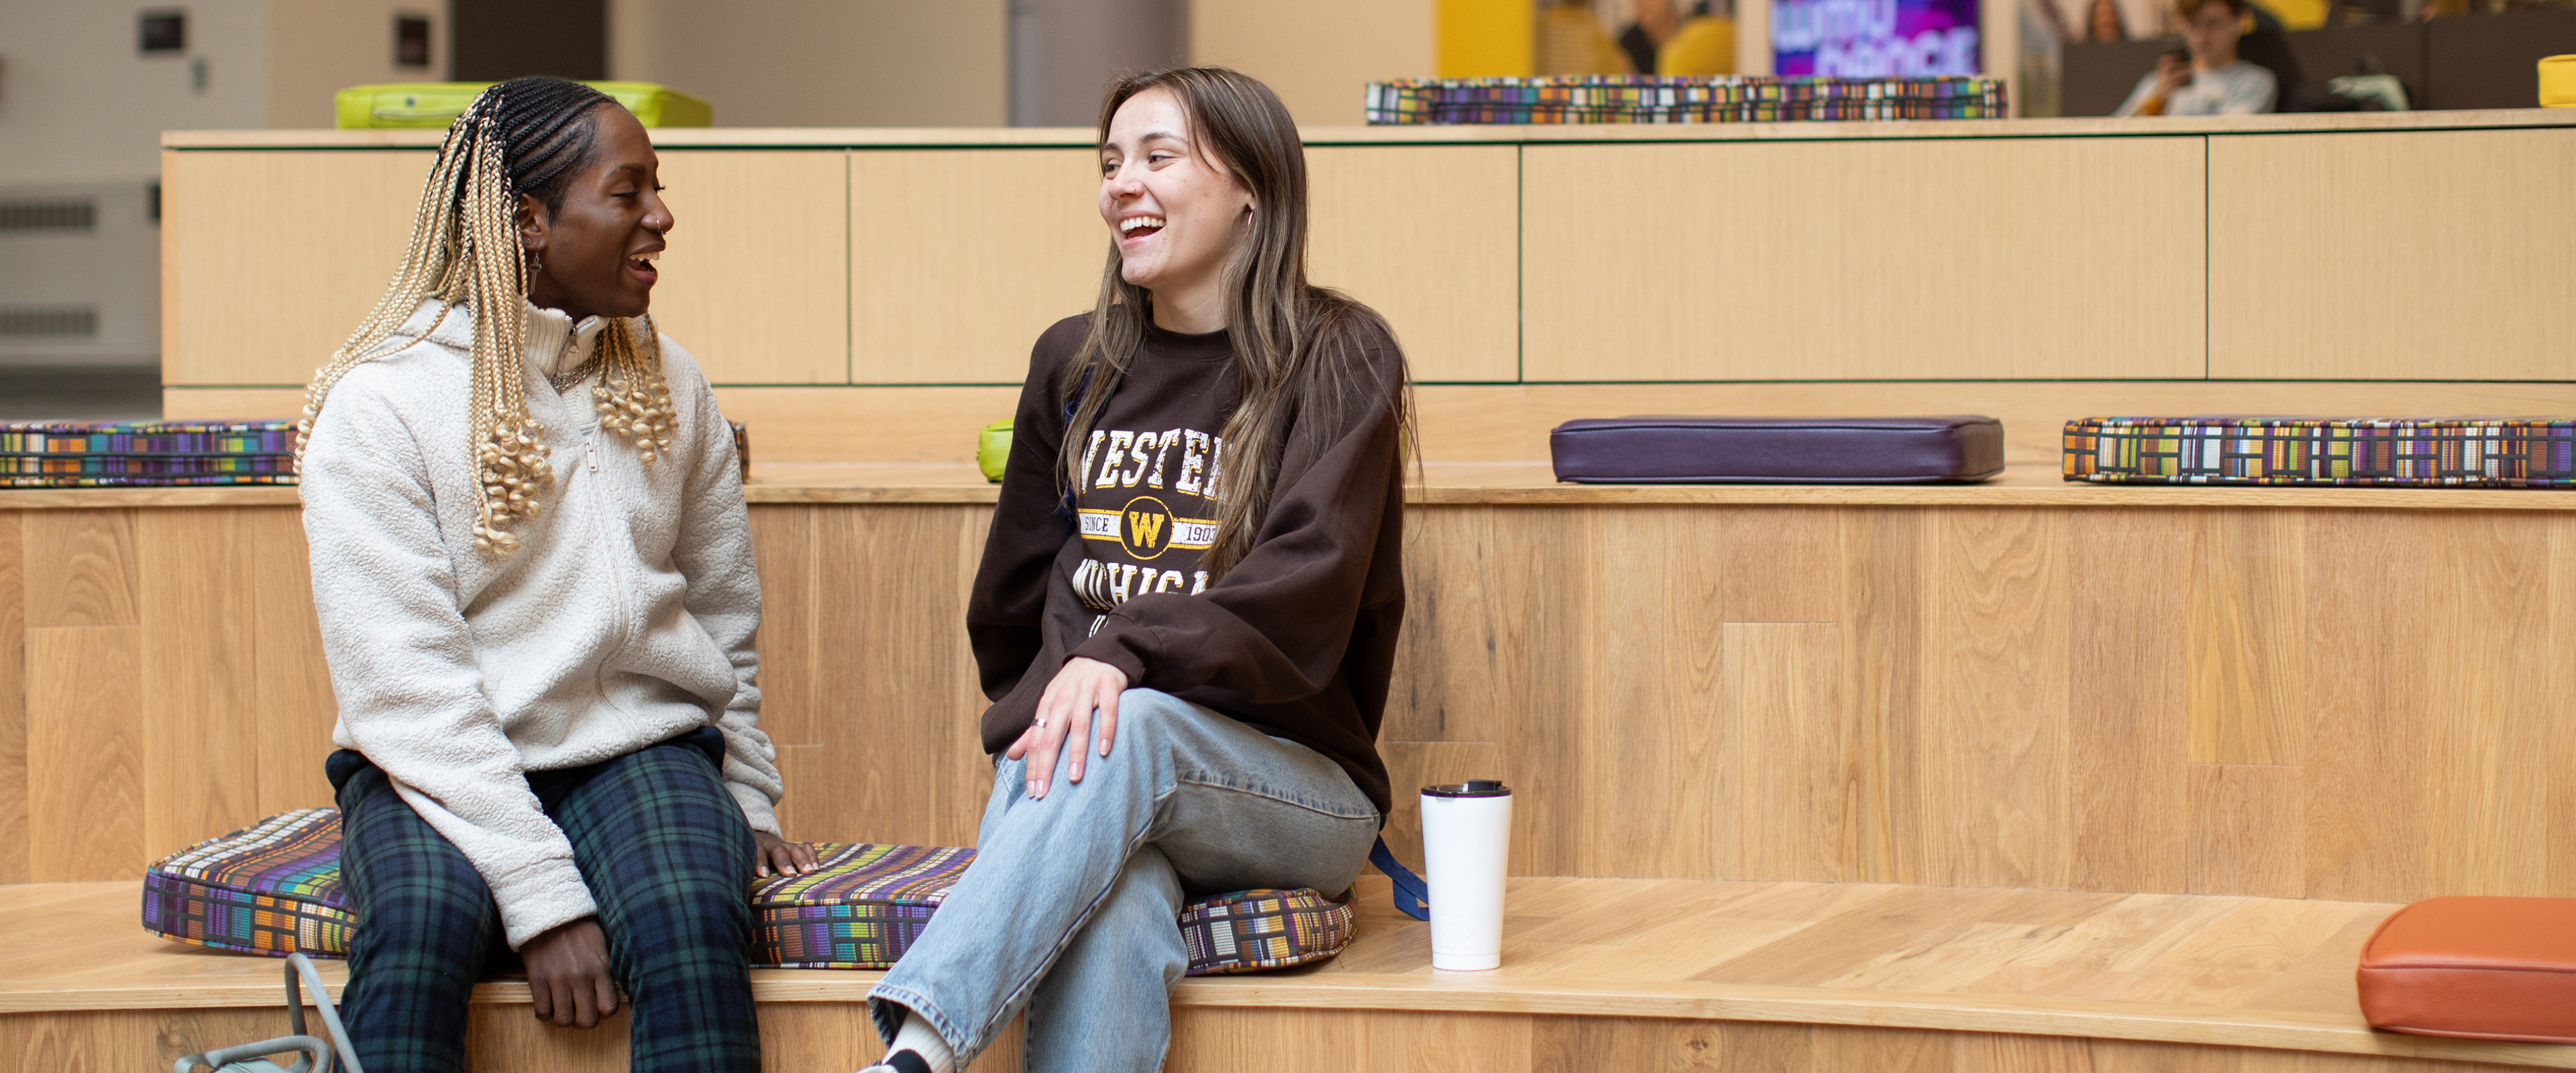 Two students laughing and sitting in student center